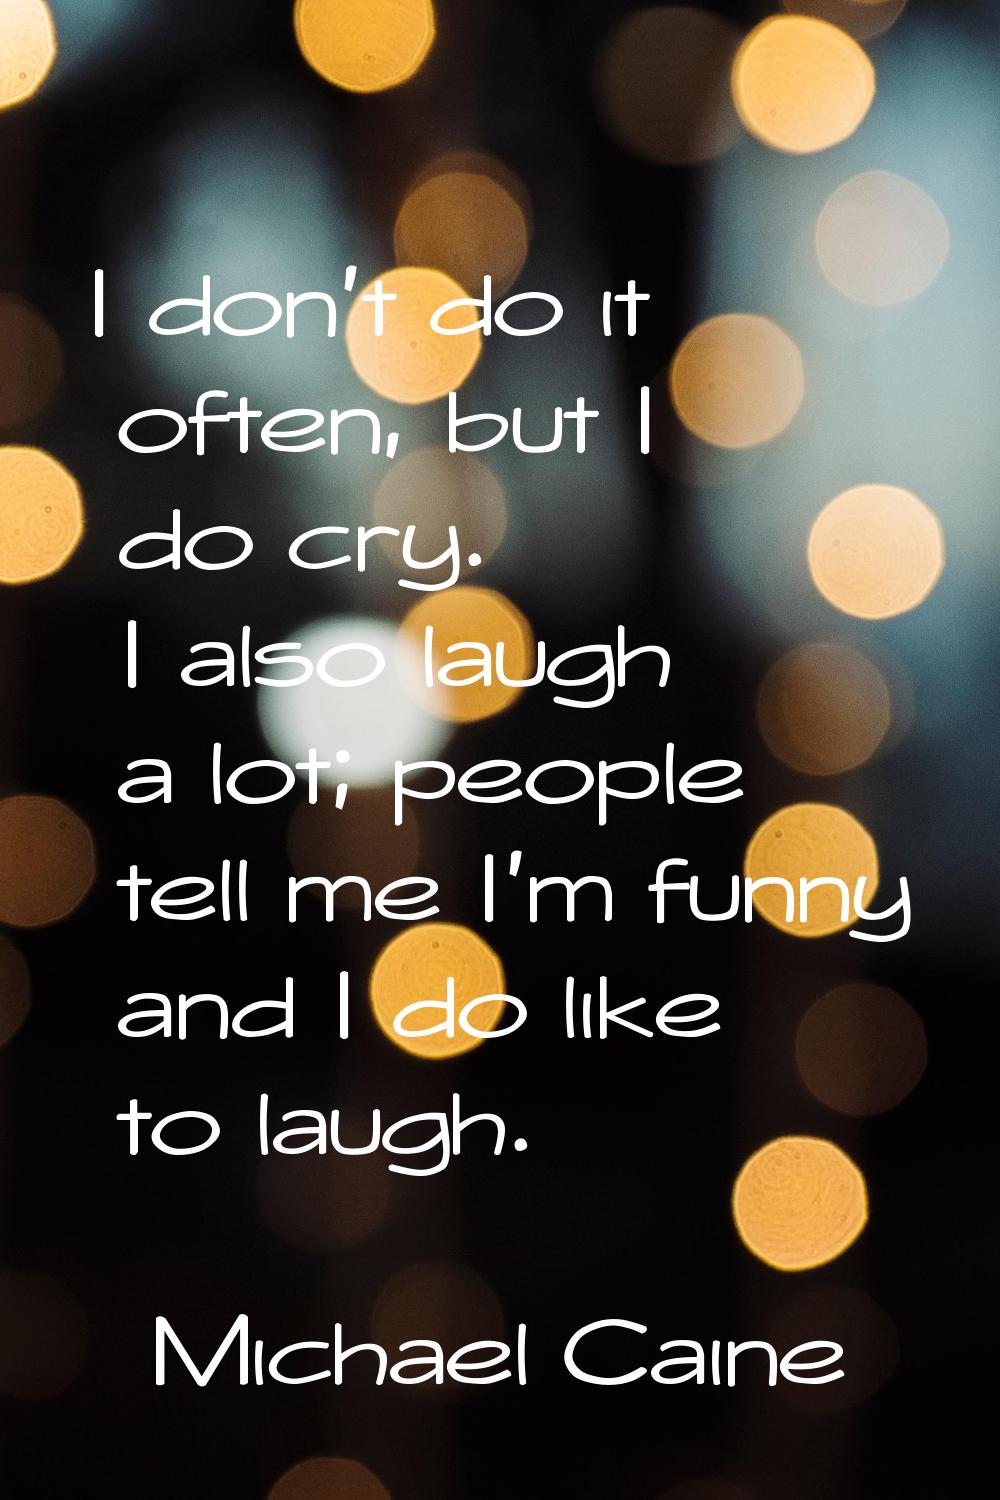 I don't do it often, but I do cry. I also laugh a lot; people tell me I'm funny and I do like to la